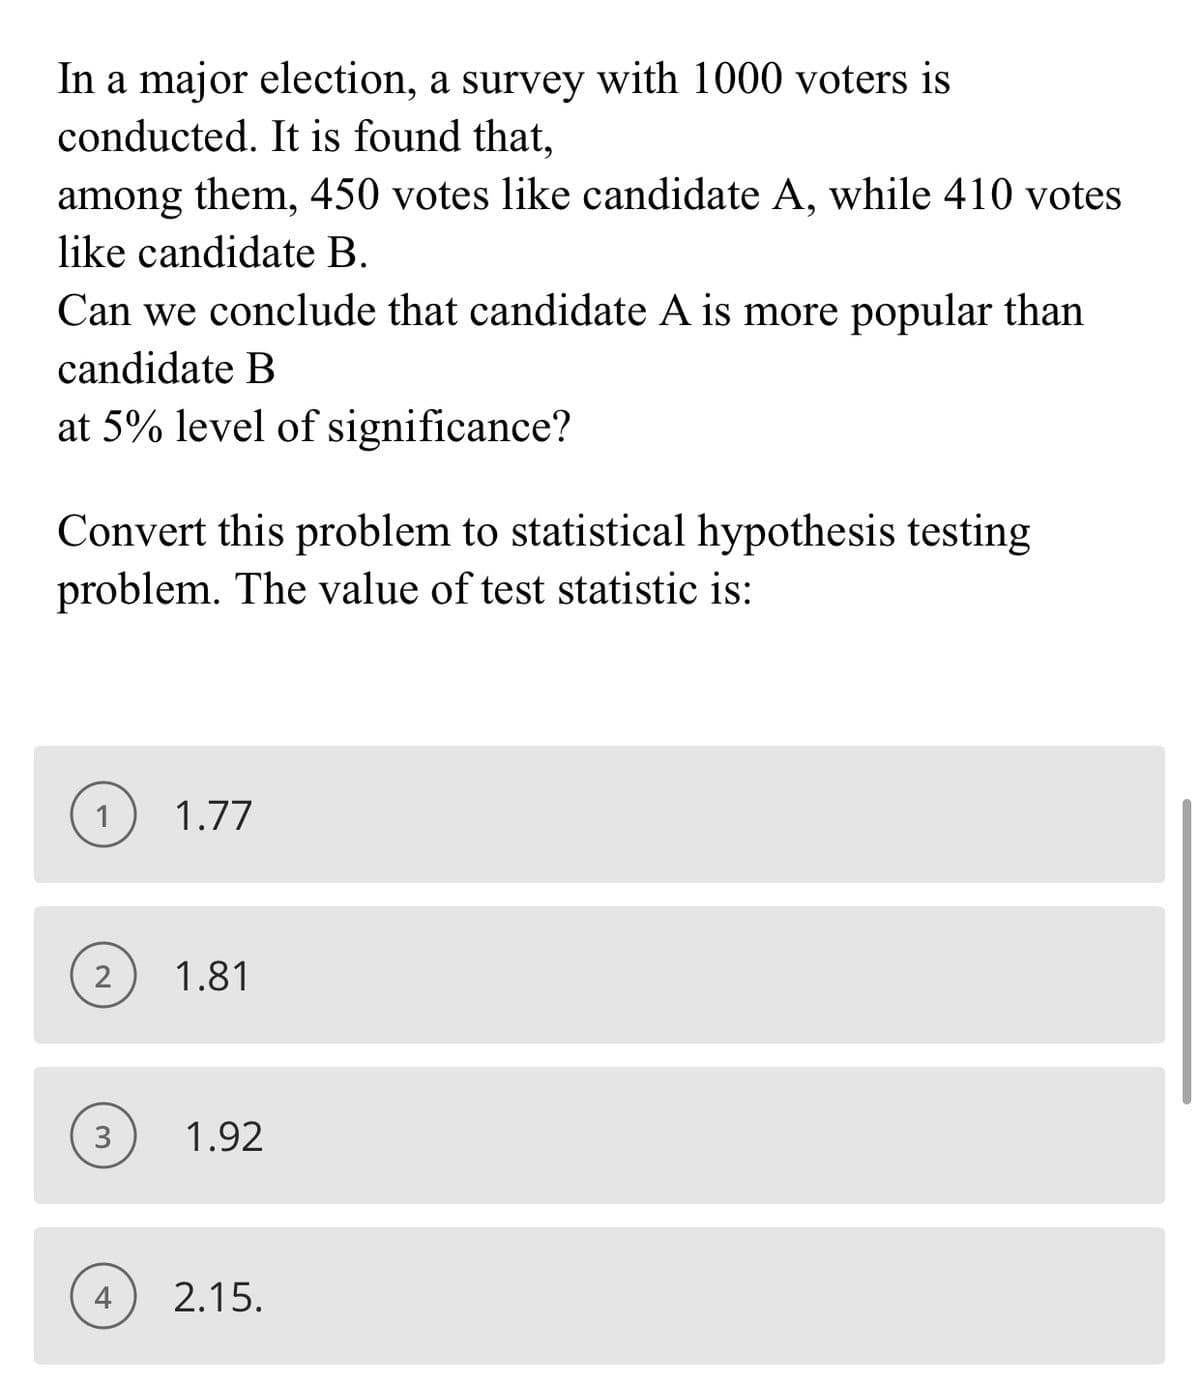 In a major election, a survey with 1000 voters is
conducted. It is found that,
among them, 450 votes like candidate A, while 410 votes
like candidate B.
Can we conclude that candidate A is more popular than
candidate B
at 5% level of significance?
Convert this problem to statistical hypothesis testing
problem. The value of test statistic is:
1
1.77
2
1.81
3
1.92
4
2.15.
